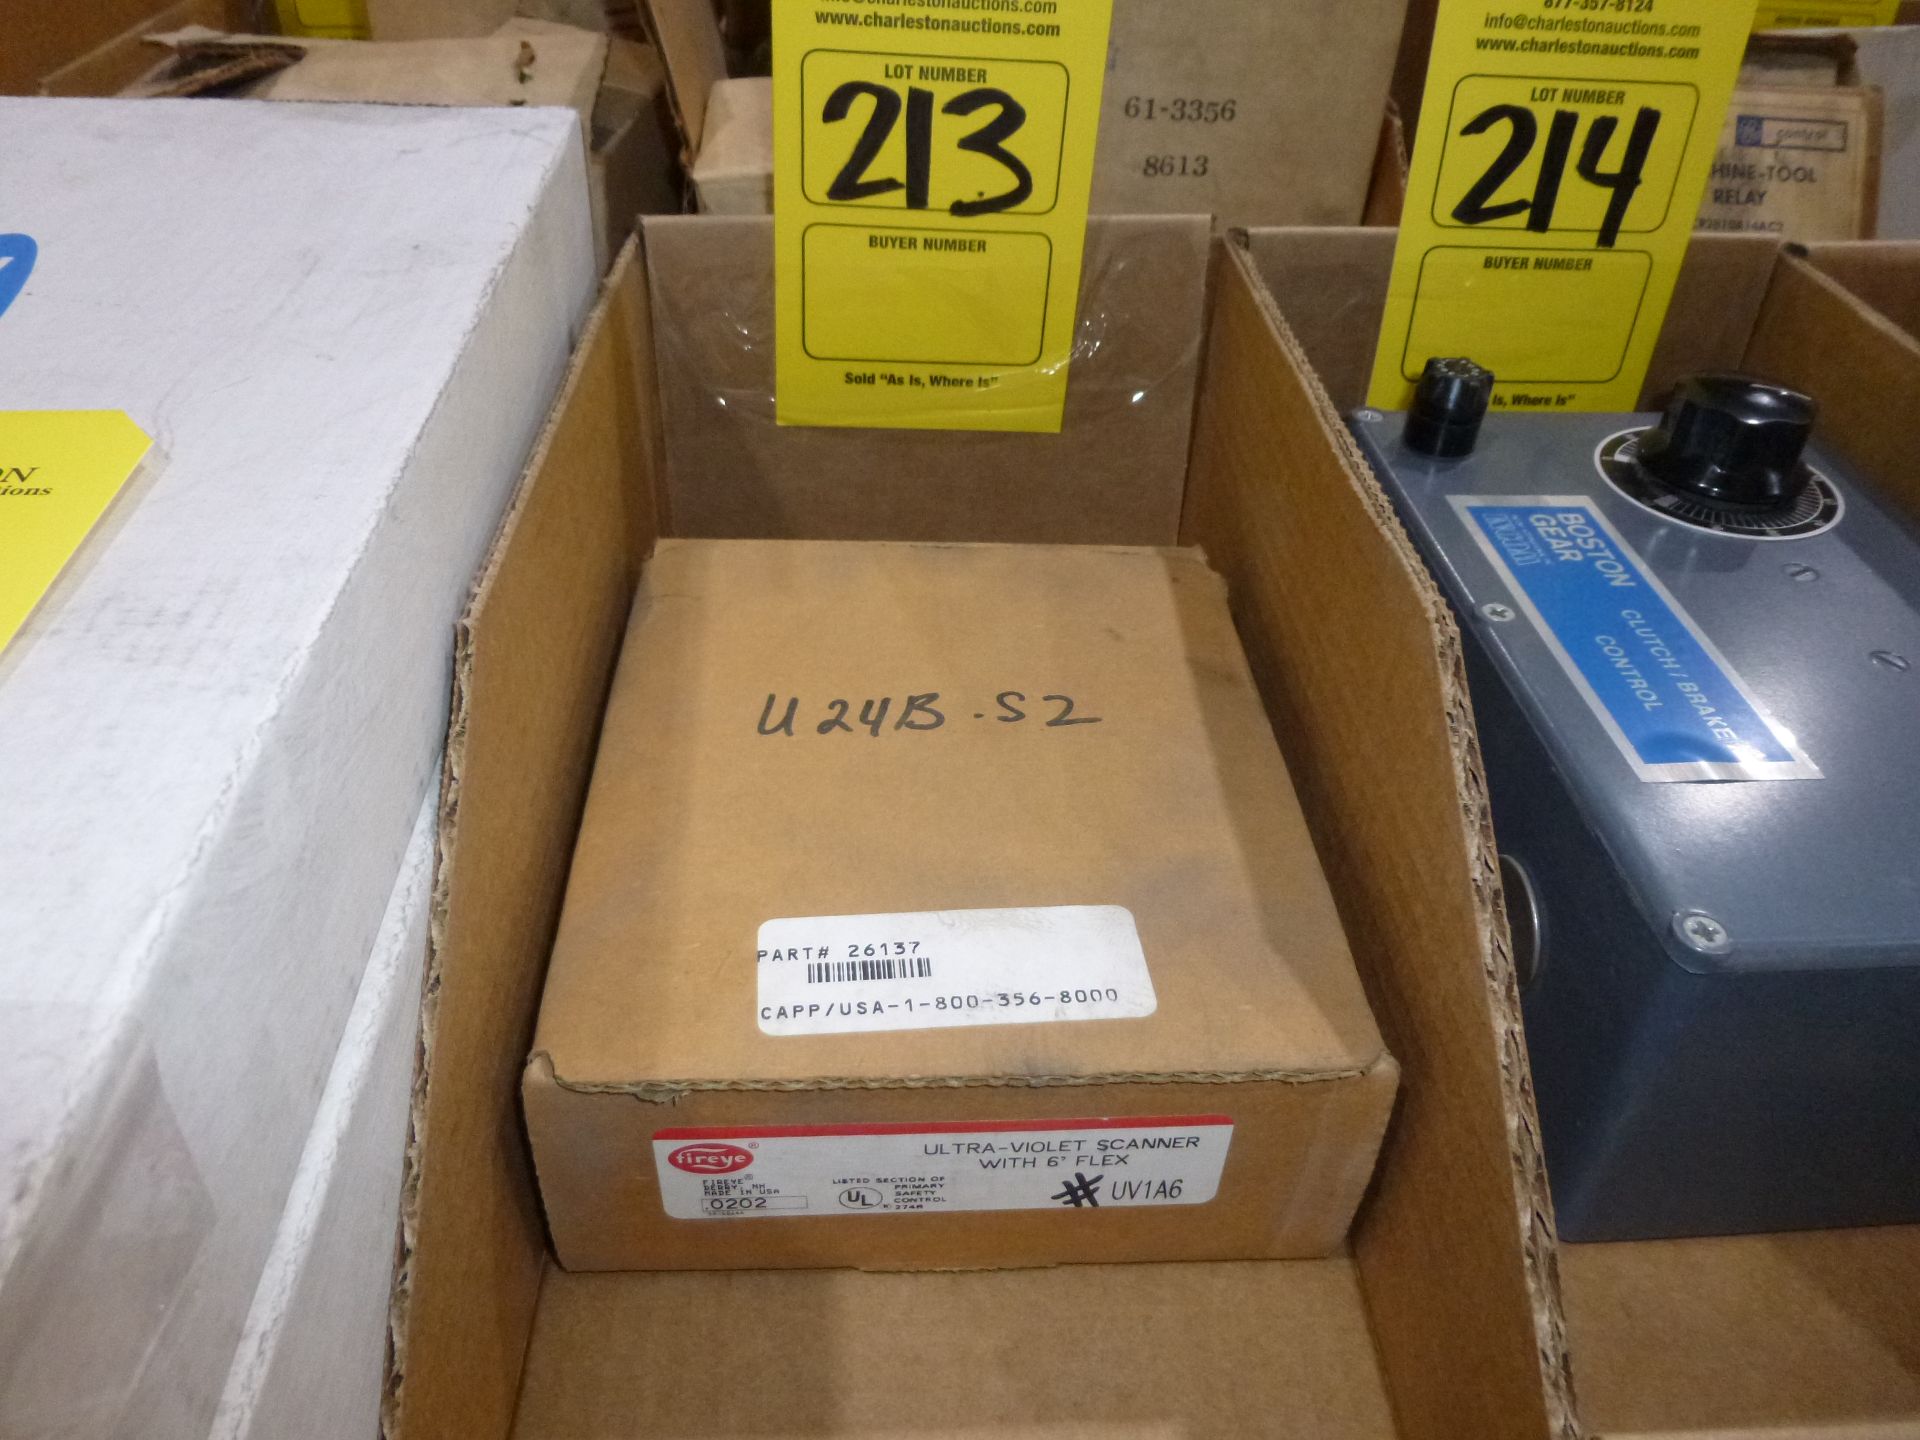 Fireye Ultra-Violet Scanner model UV1A6, new in box, as always with Brolyn LLC auctions, all lots